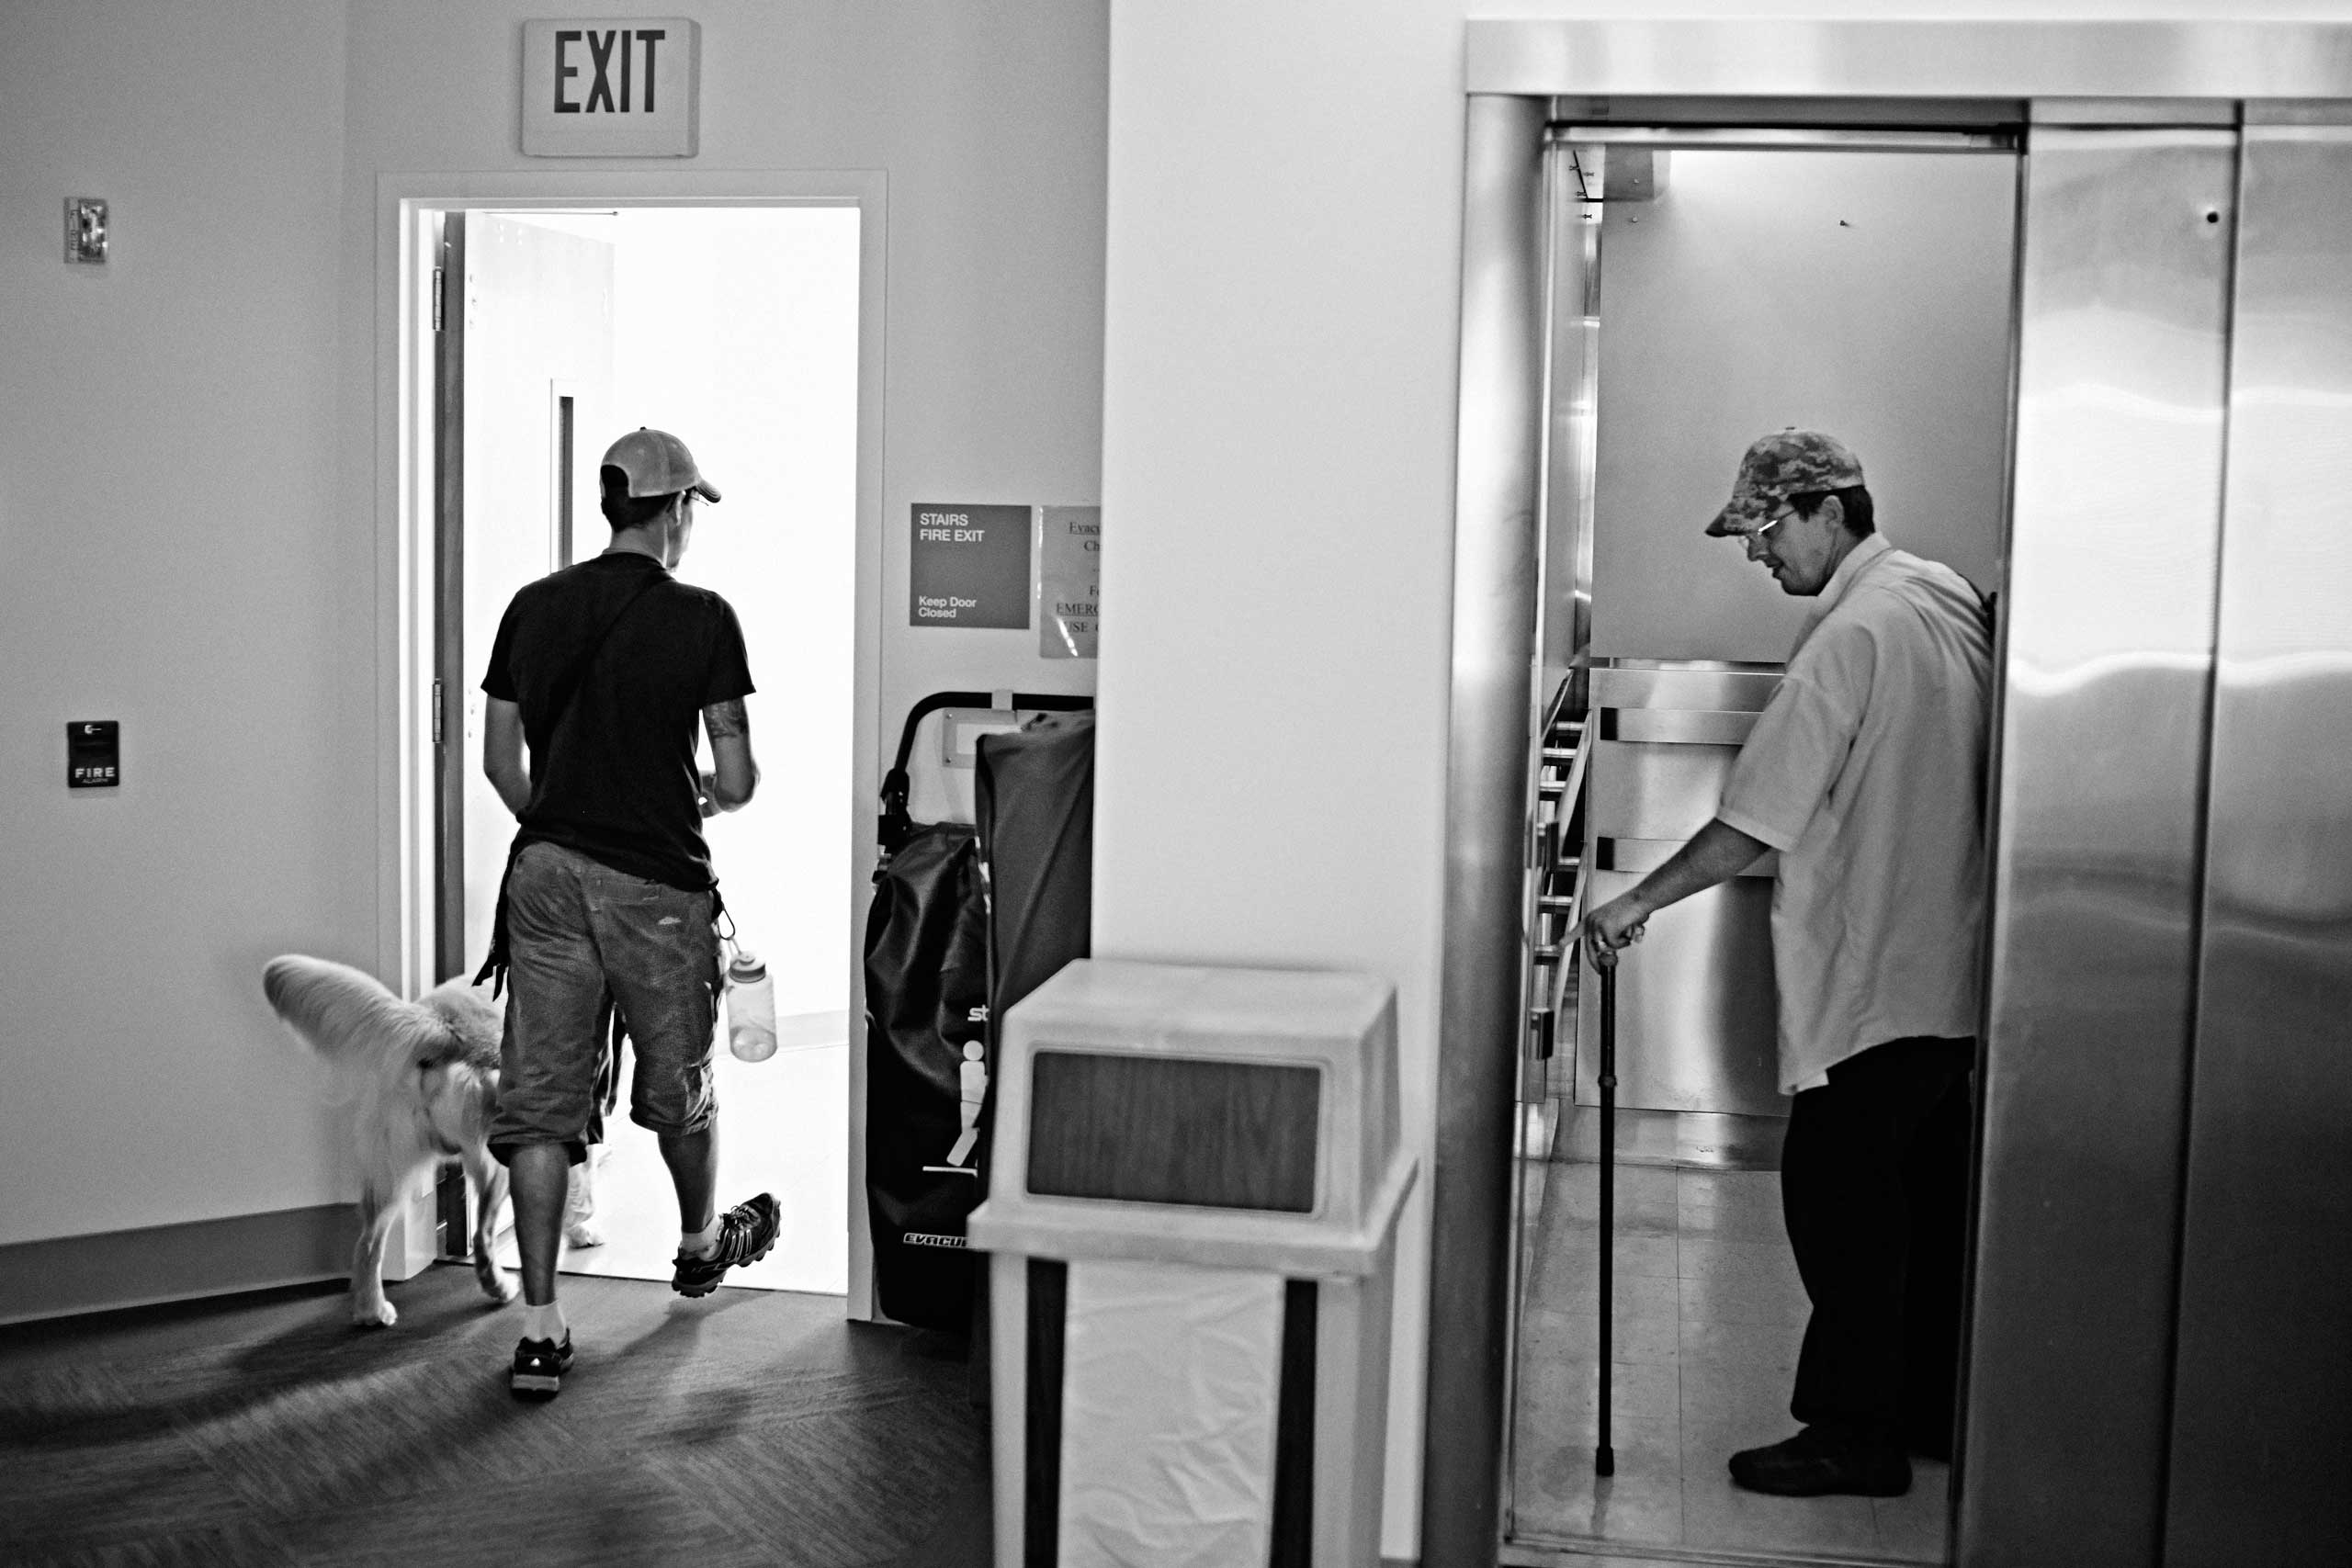 Paul Robicheaux (R) takes the elevator while Joshua JC Brum leads a service dog towards the staircase at the VA’s Menlo Park campus in California, United States on October 3, 2014.
                              
                              US Marine Corps Veteran Paul Robicheaux served with 1st Battalion, 12th Marines at Marine Corps Base Hawaii between 1993 and 1997.
                              
                              US Air Force Veteran Joshua JC Brum served with 99th Air Base Wing, 99th Civil Engineer Squadron, EOD squadron on two tours in Iraq and one in Afghanistan between 2008 and 2011.
                              
                              Paws for Purple Hearts is the first program of its kind to offer therapeutic intervention for Veterans and active-duty military personnel by teaching those with Post-Traumatic Stress Disorder (PTSD) to train service dogs for their comrades with combat-related injuries.